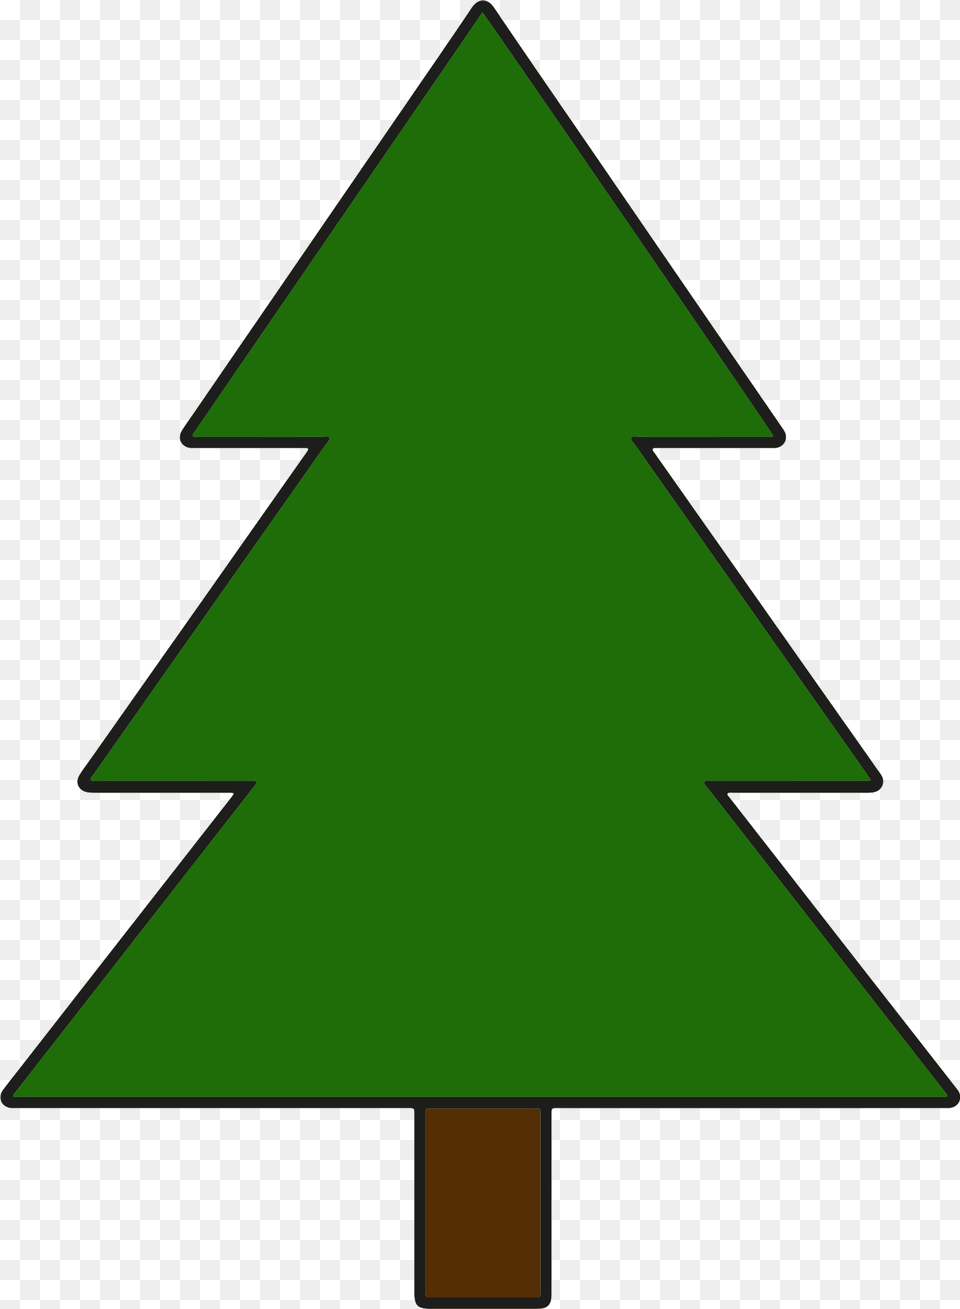 Simple Pine Tree Clipart Draw A Cartoon Tree, Triangle, Symbol, Green Free Png Download